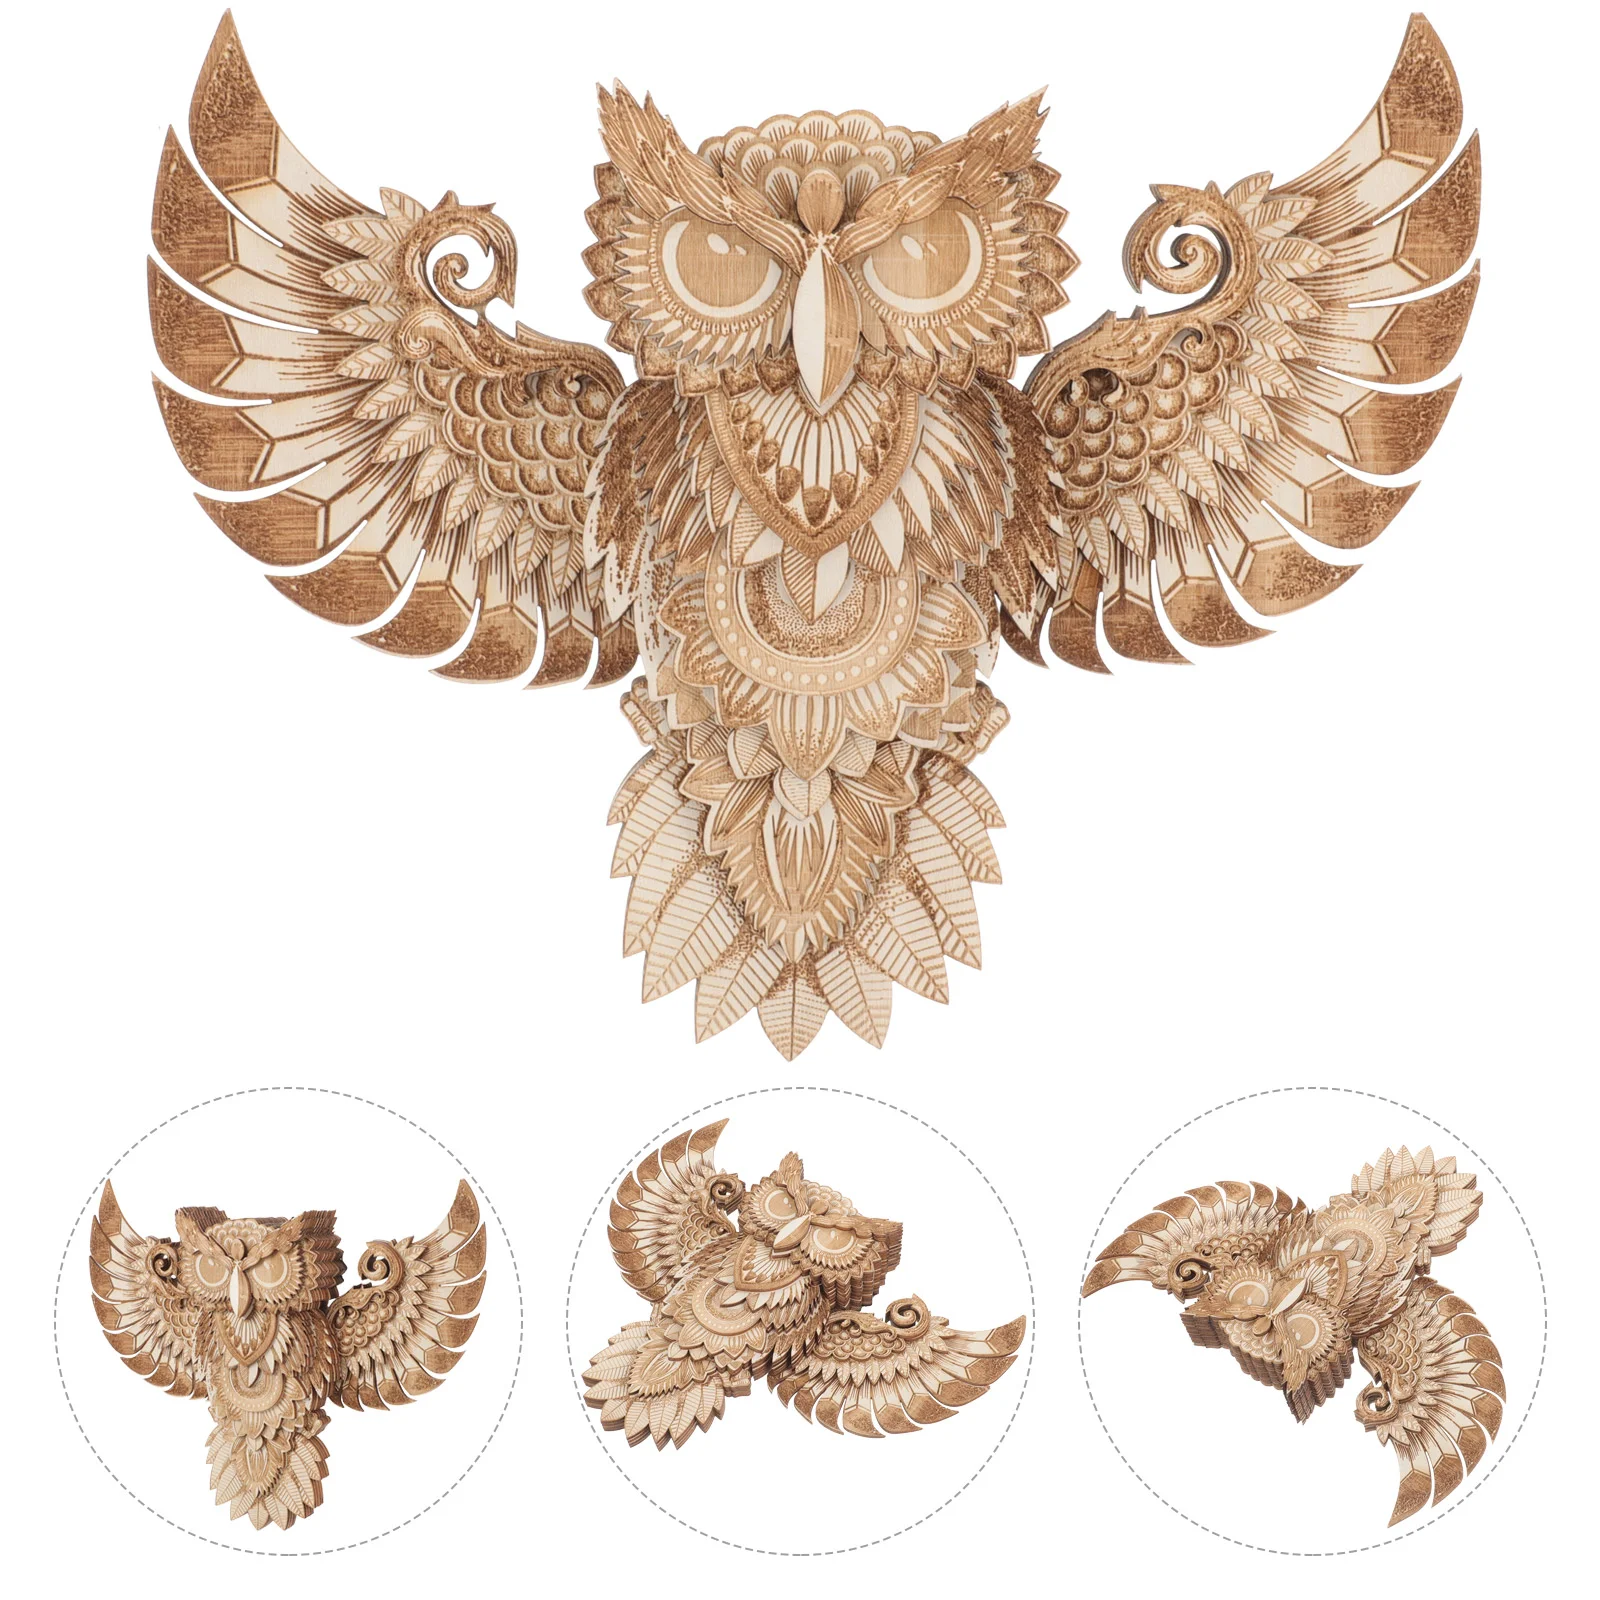 

Wooden Owl Ornament Hanging Decorations Festival Party Shapes Crafting Home Wall Jigsaw Puzzles